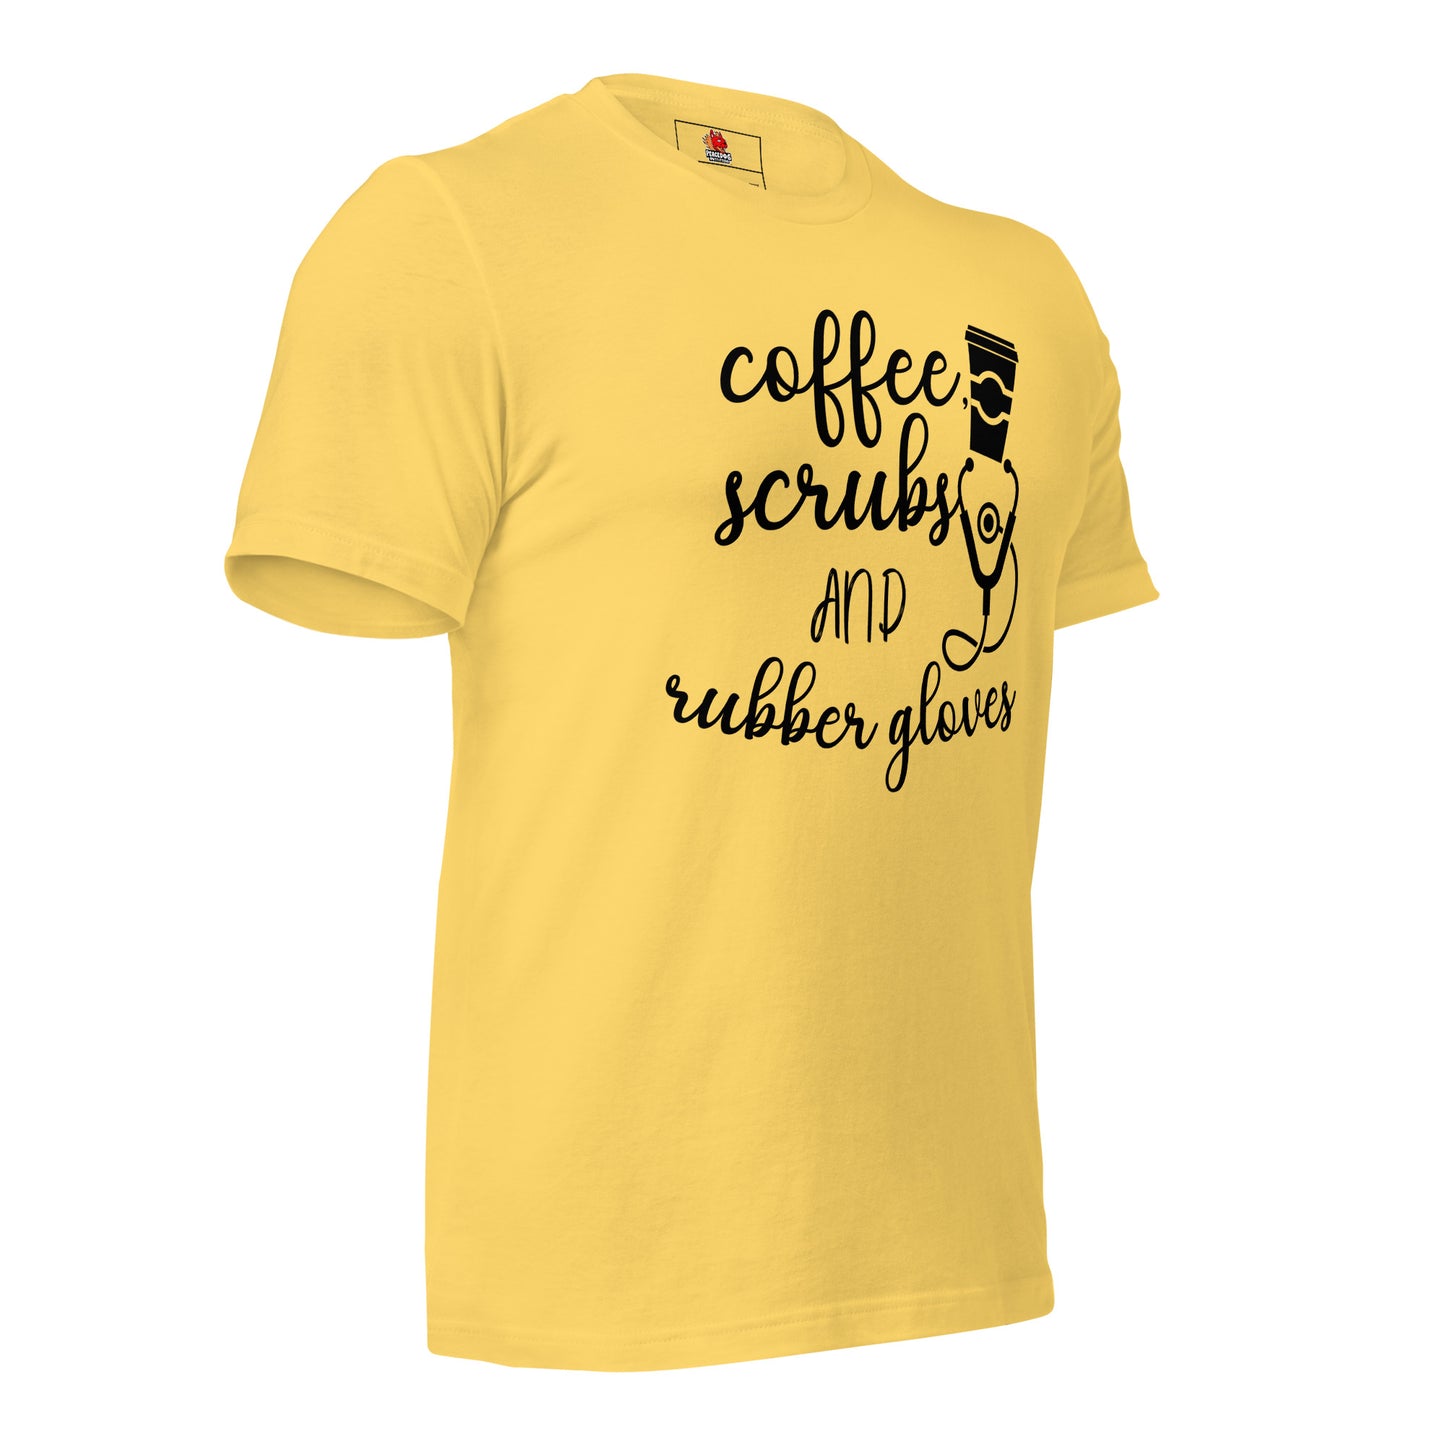 Coffee, Scrubs, and Rubber Gloves T-shirt